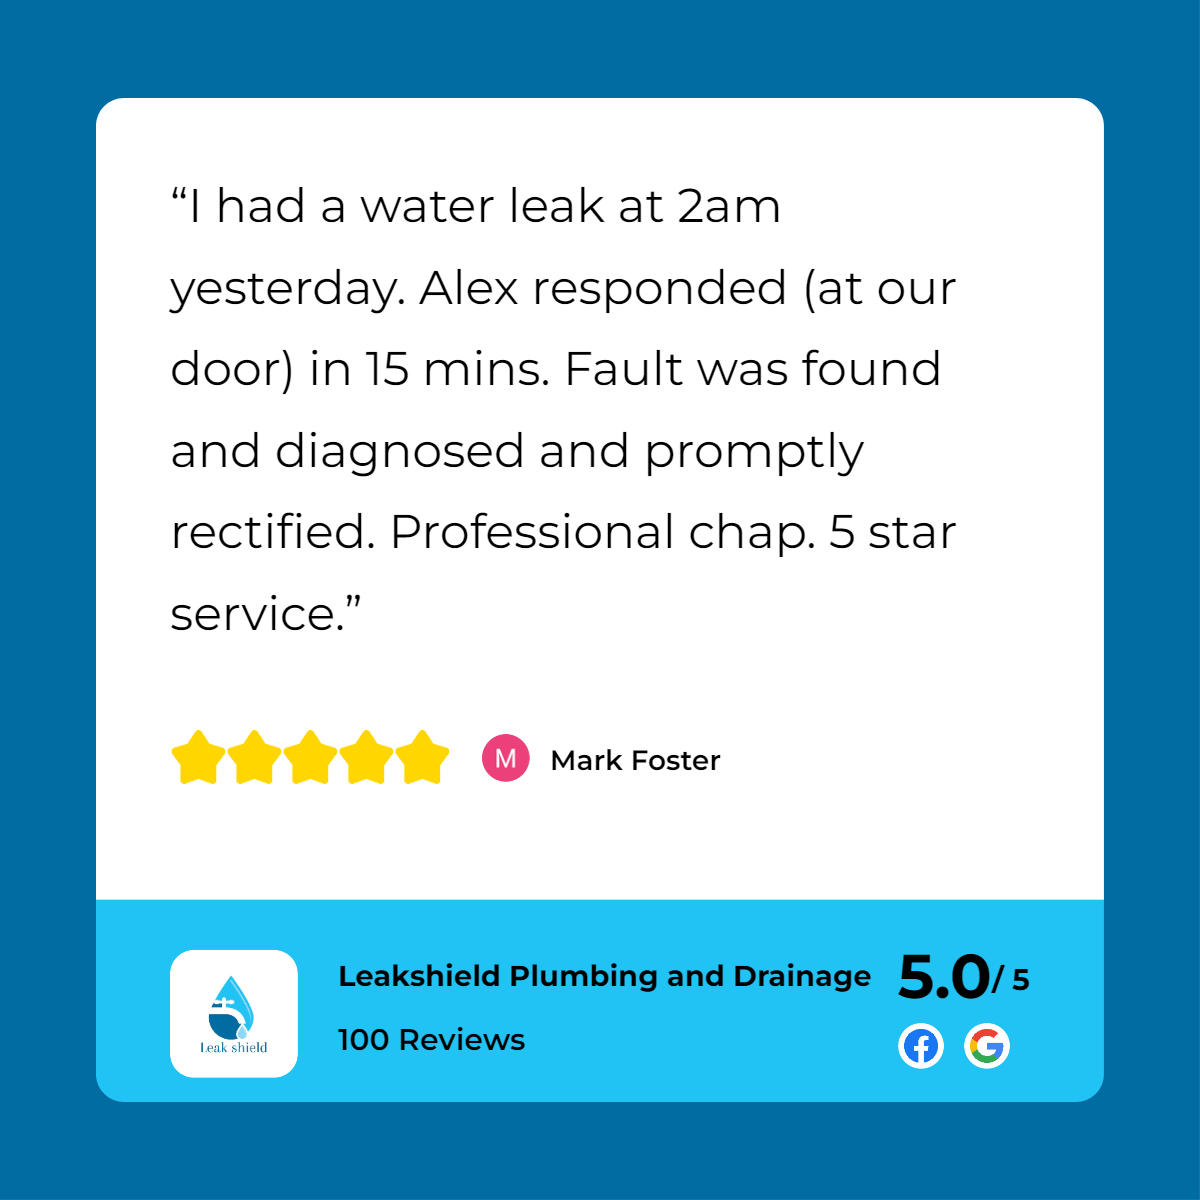 A customer review of a water leak at a home.